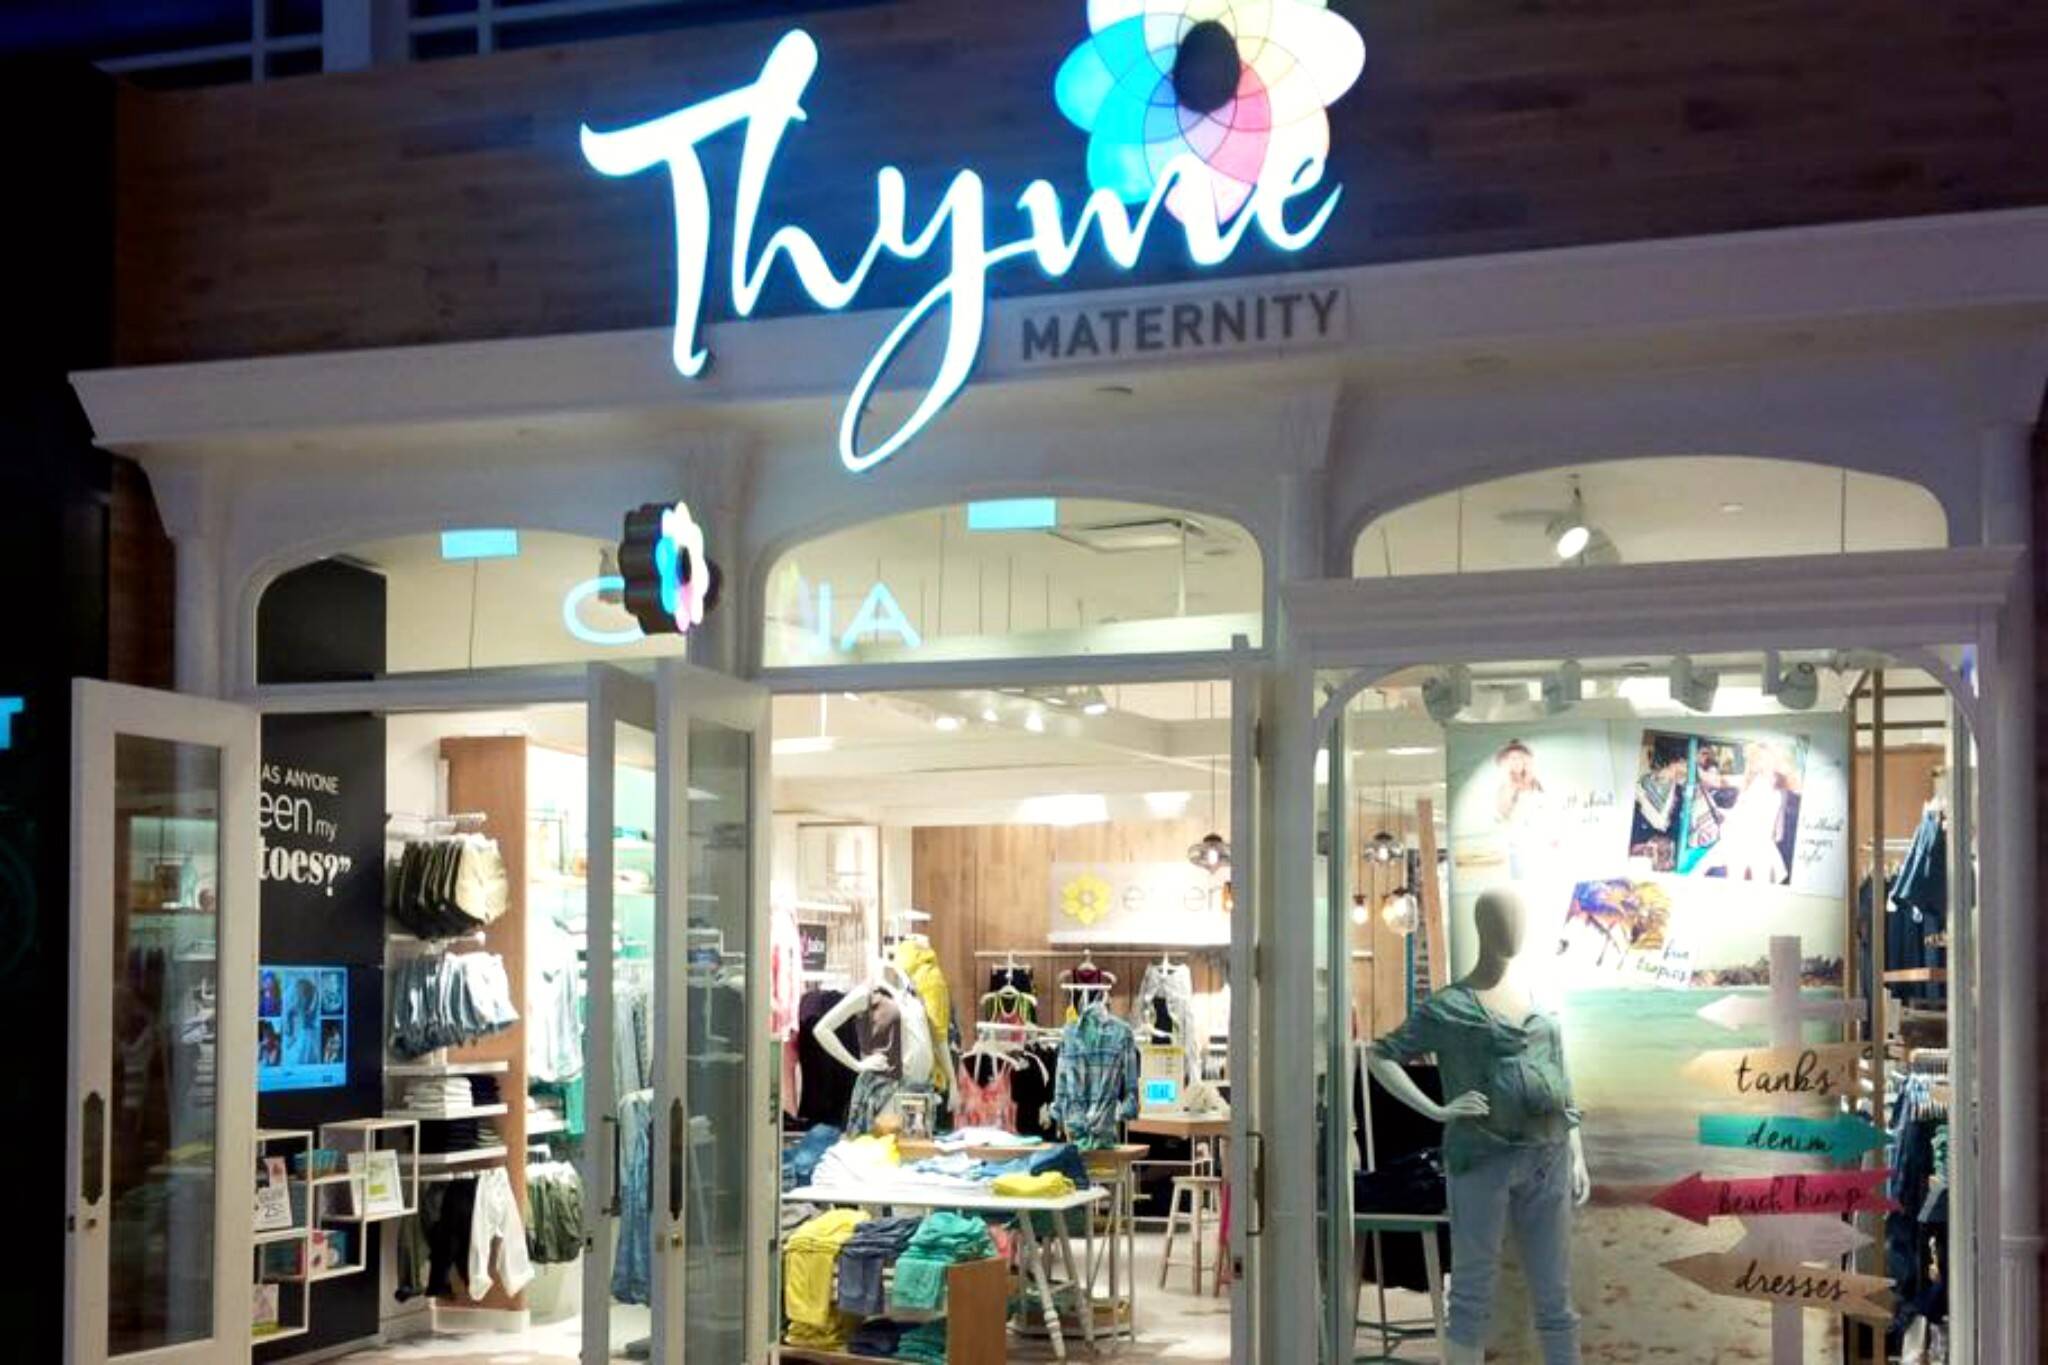 https://media.blogto.com/listings/20190309-thyme-maternity-1.jpg?w=2048&cmd=resize_then_crop&height=1365&quality=70